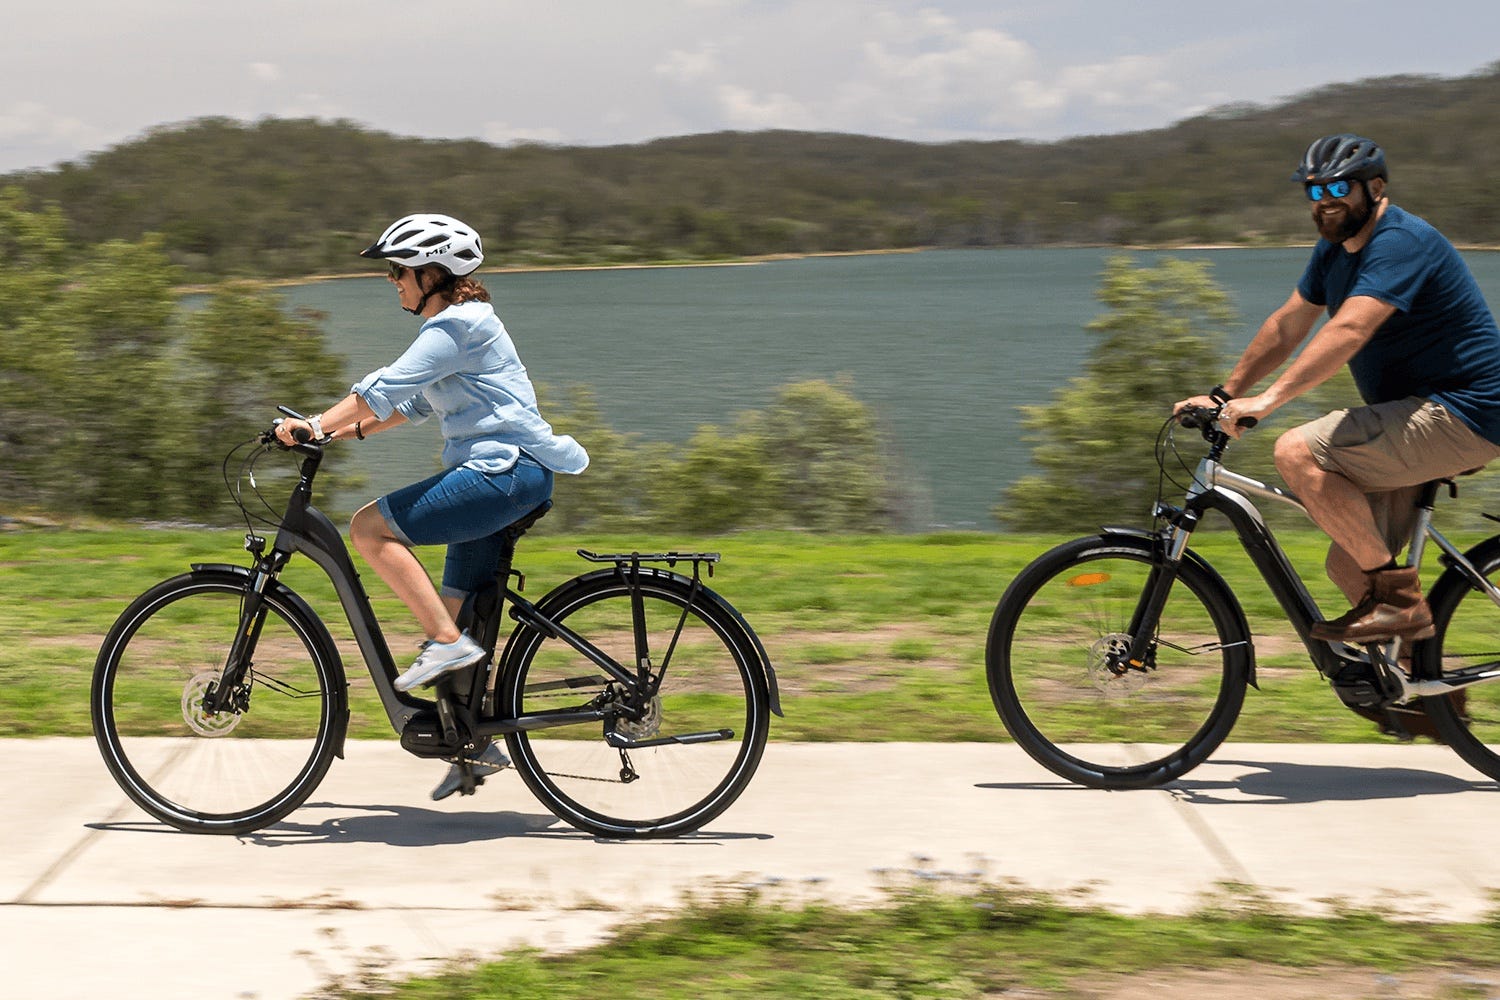 10 REASONS WHY AN E-BIKE IS GREAT FOR SUMMER